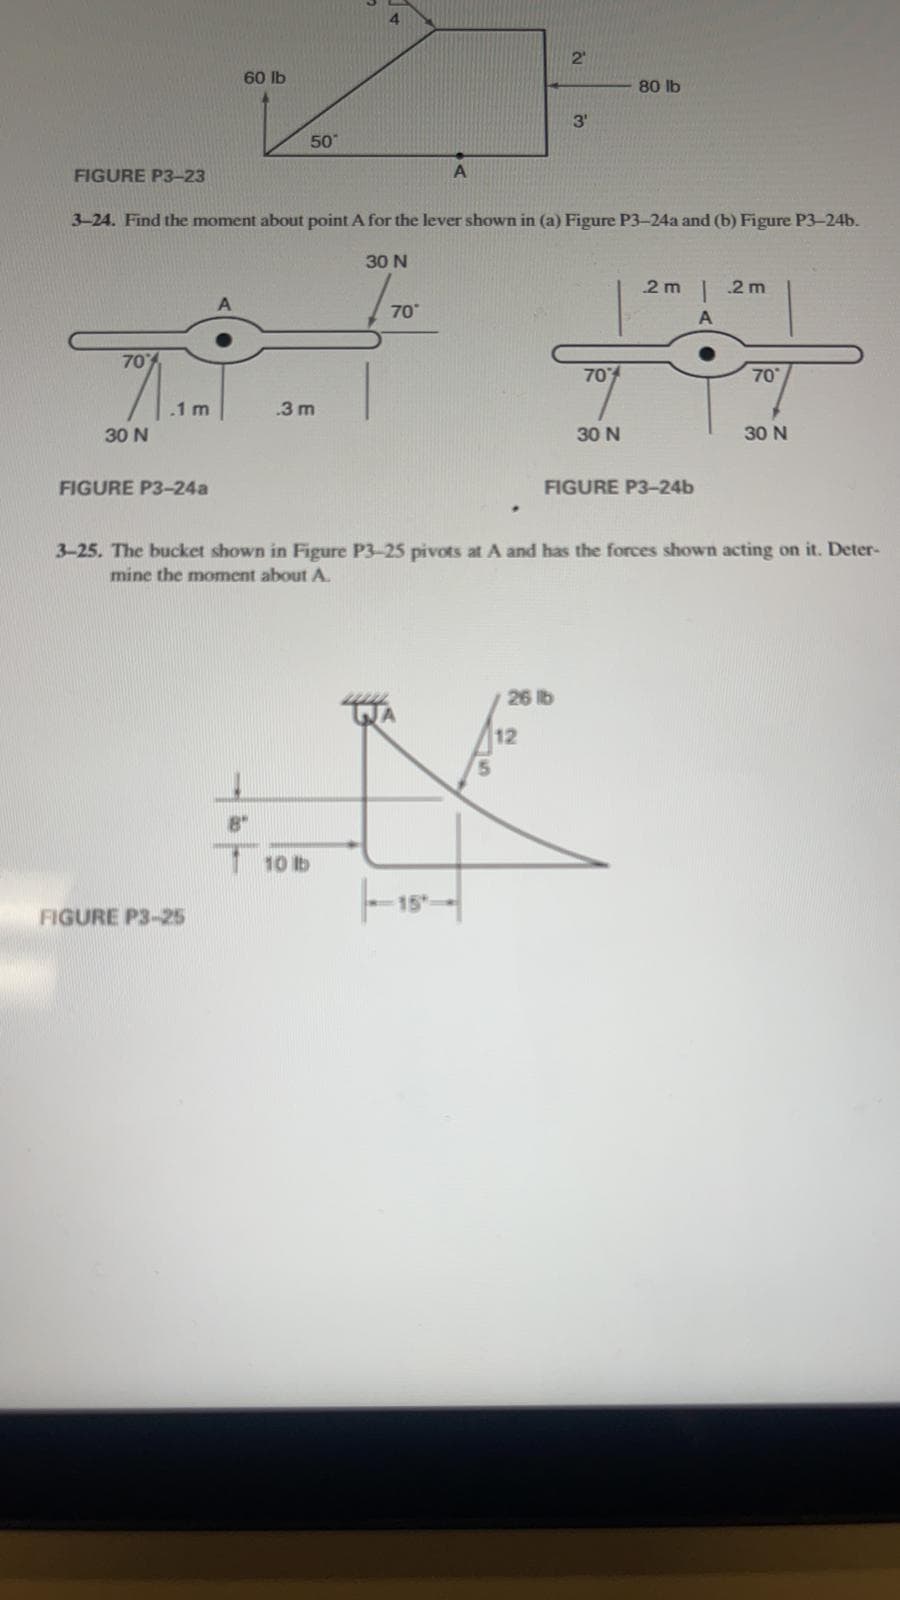 60 lb
FIGURE P3-25
80 lb
3'
50
FIGURE P3-23
A
3-24. Find the moment about point A for the lever shown in (a) Figure P3-24a and (b) Figure P3-24b.
30 N
2m | 2m
A
70
70%
70°
.1 m
.3 m
30 N
30 N
30 N
FIGURE P3-24a
FIGURE P3-24b
3-25. The bucket shown in Figure P3-25 pivots at A and has the forces shown acting on it. Deter-
mine the moment about A.
26 lb
8"
10 lb
70°
-15
2
12